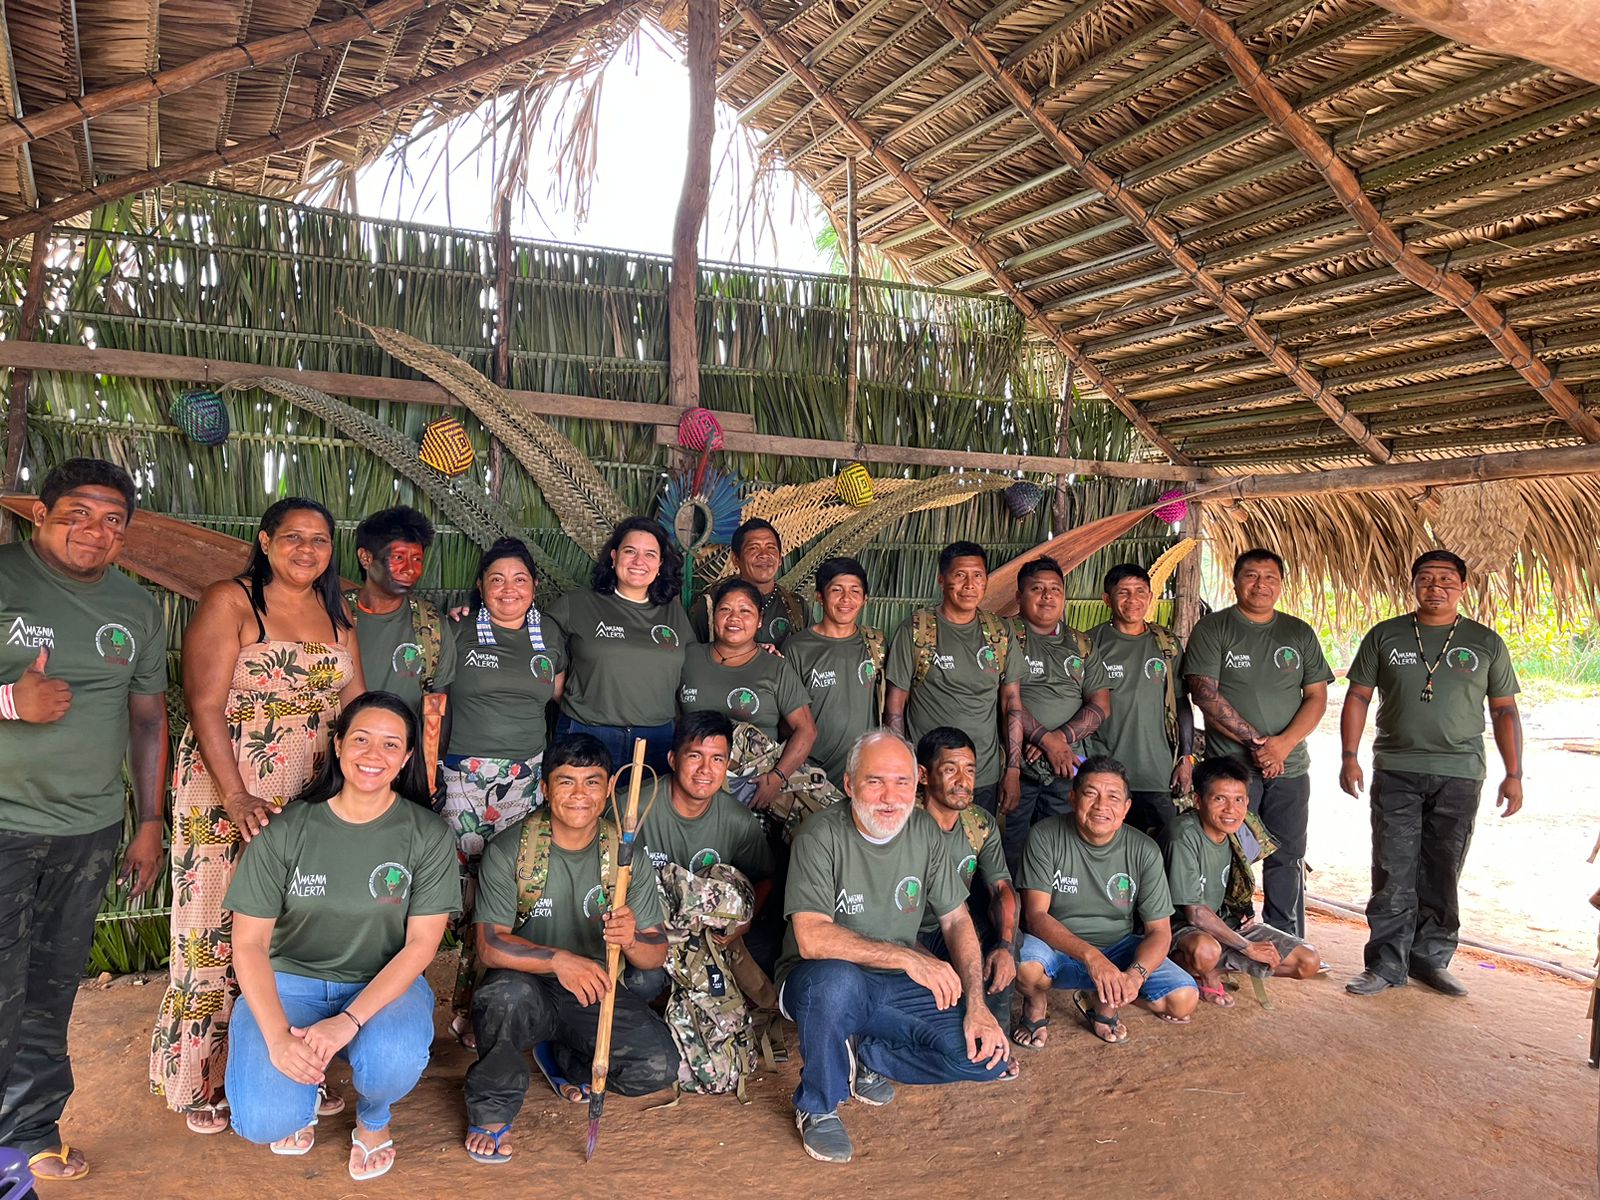 Introducing AmazoniAlerta’s first team of Environmental Agents